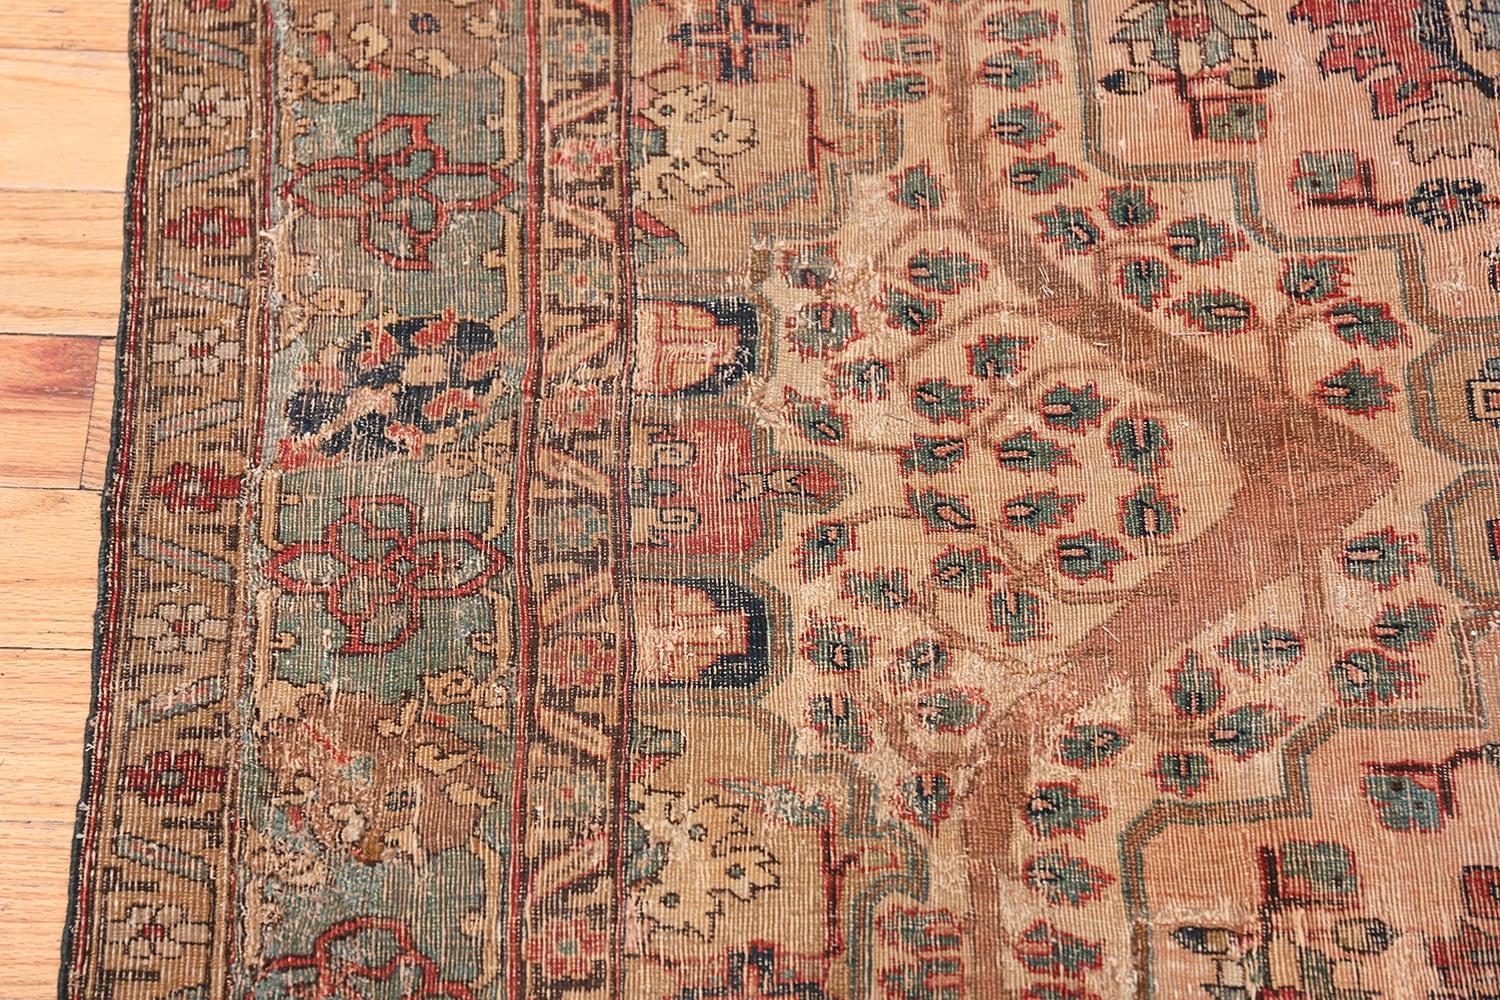 Small size 17th century Persian Khorassan rug, Country of Origin / rug type: Persian rug, Circa date 17th century. Size: 4 ft 5 in x 5 ft 9 in (1.35 m x 1.75 m)

 